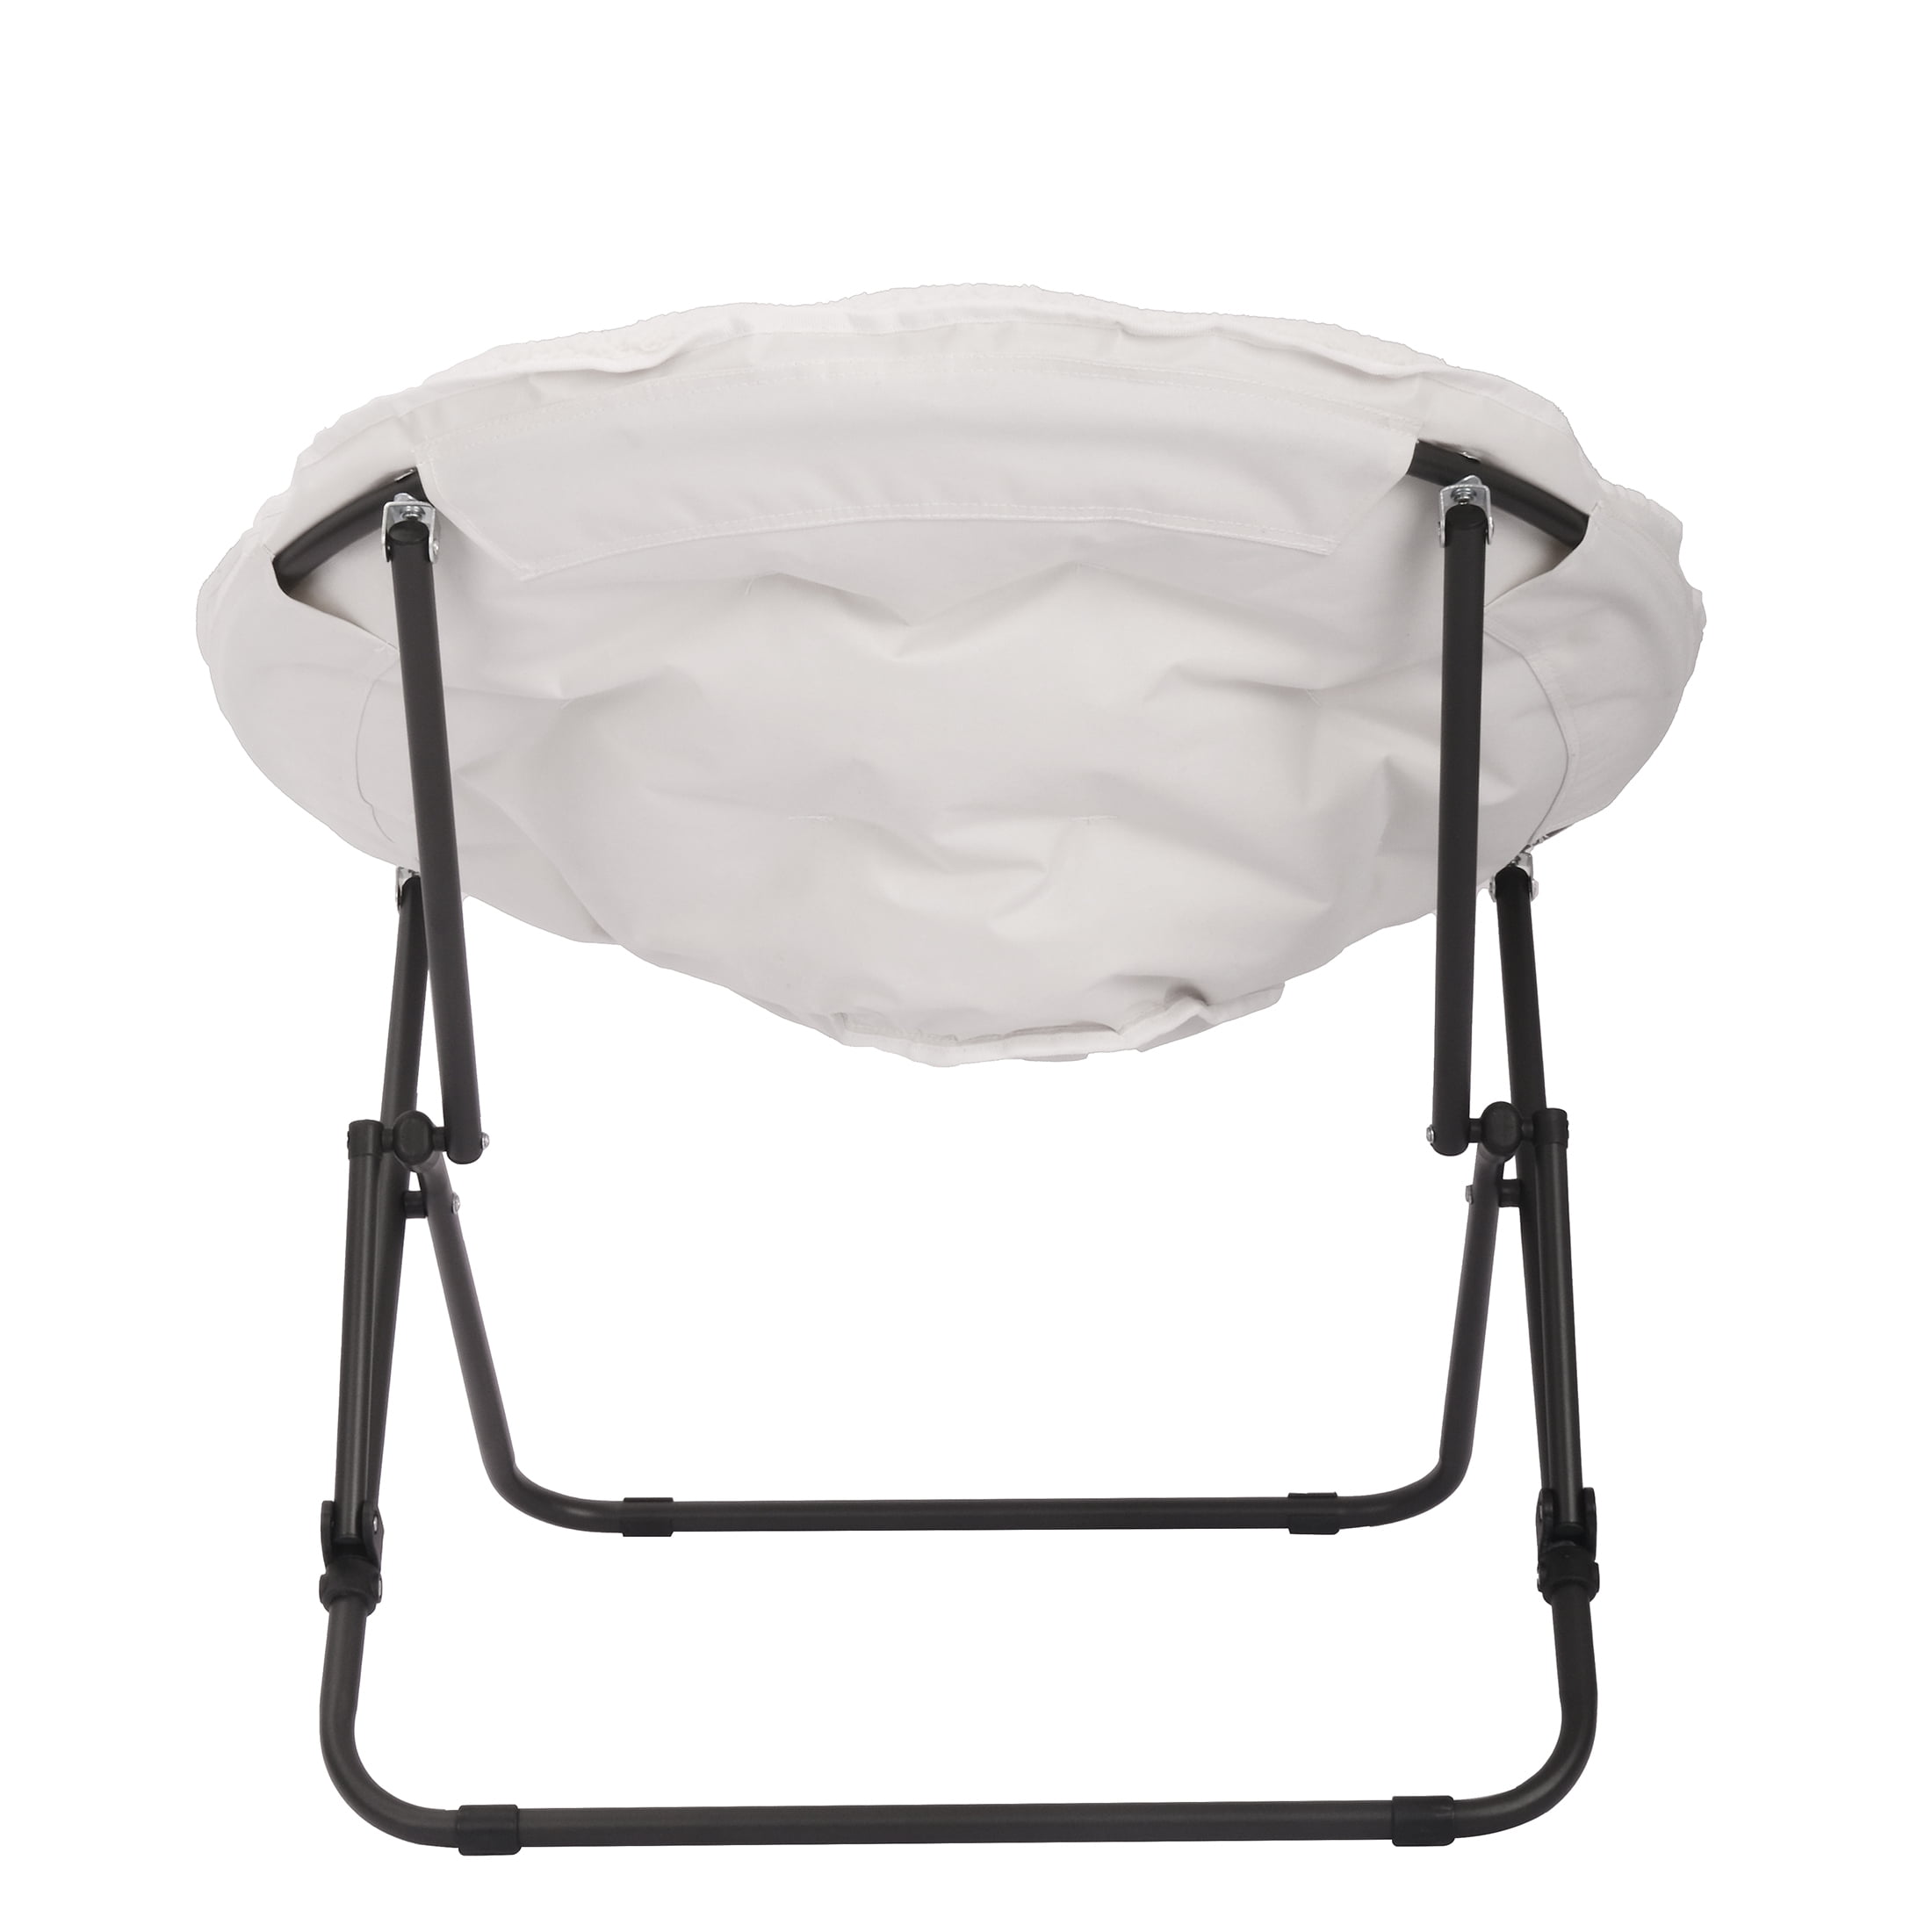 Mainstays Saucer Chair for Kids and Teens, White Faux Shearling